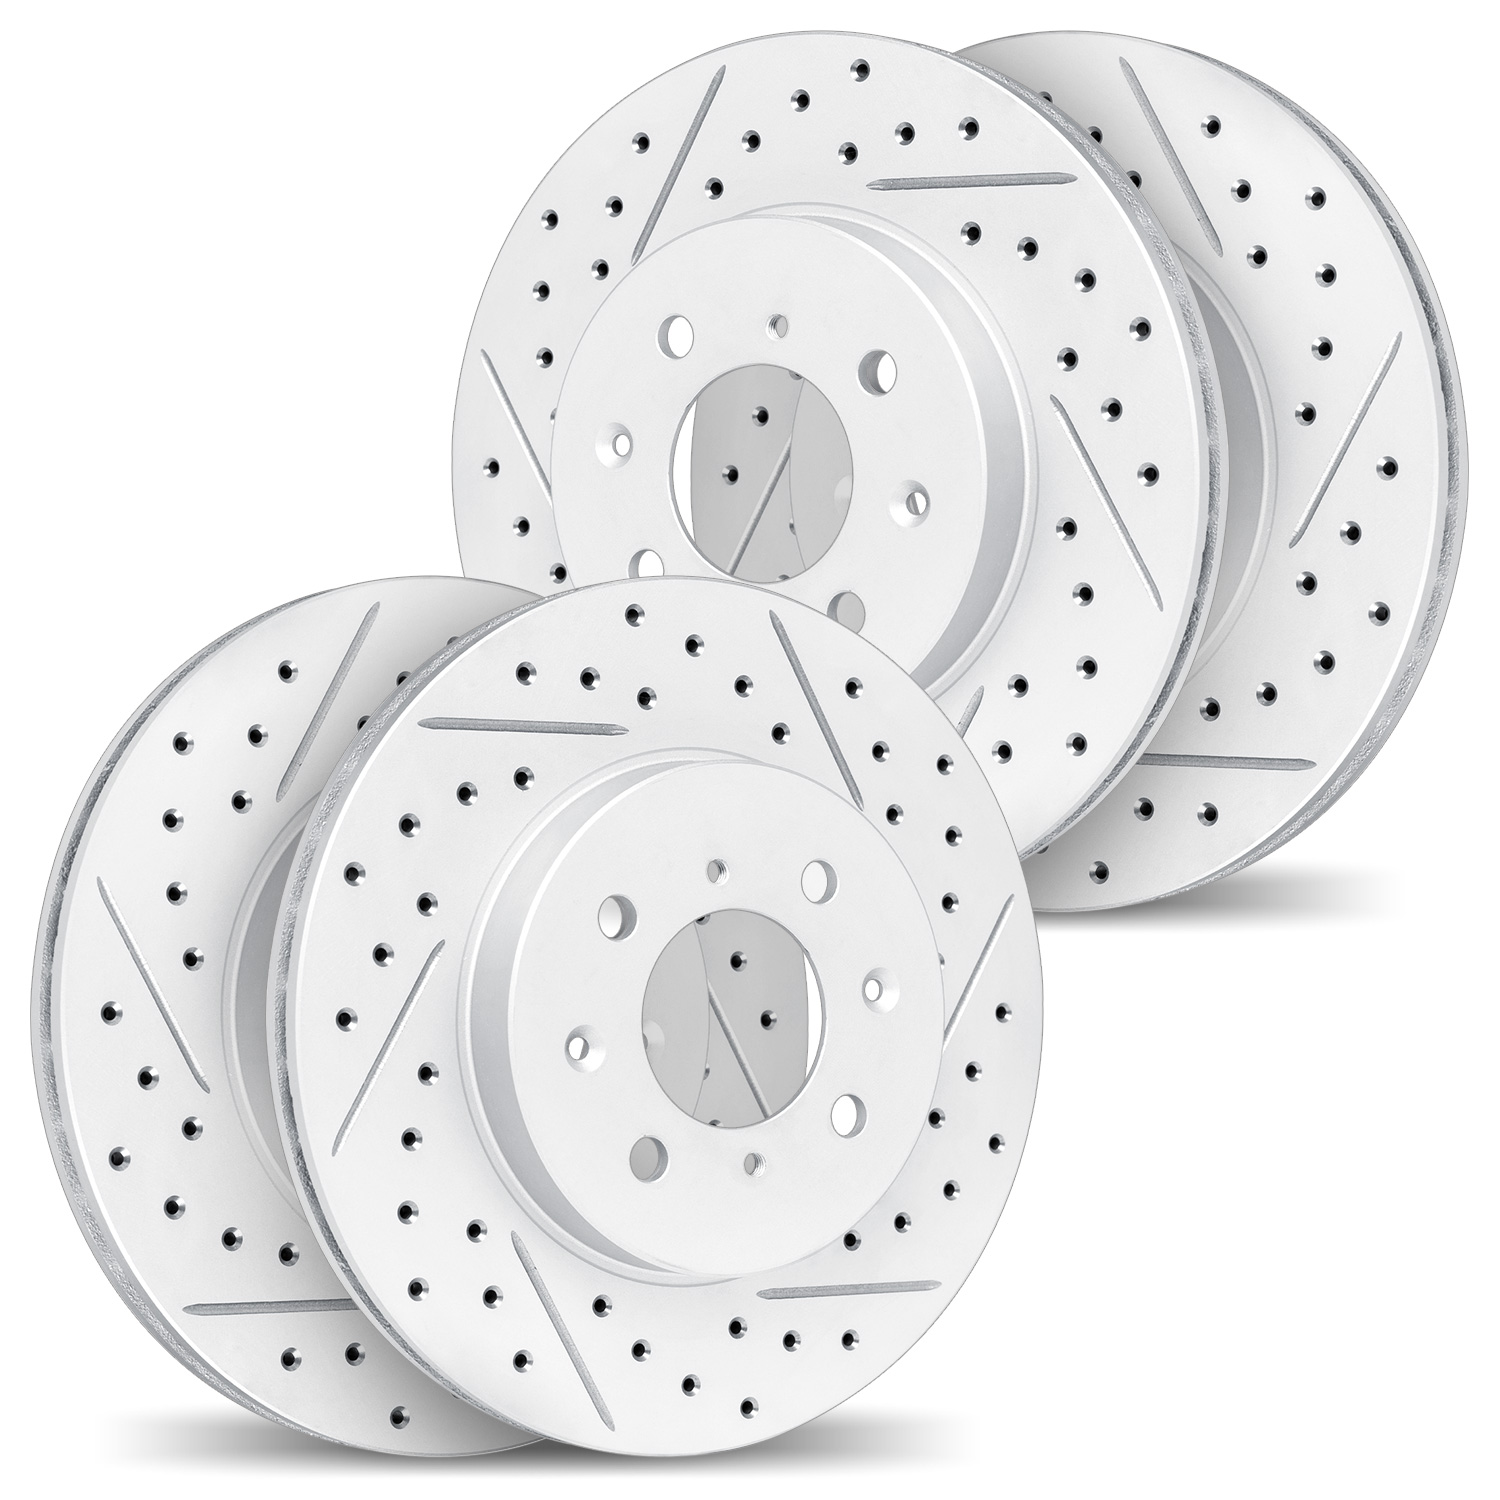 2004-76052 Geoperformance Drilled/Slotted Brake Rotors, 2000-2005 Lexus/Toyota/Scion, Position: Front and Rear